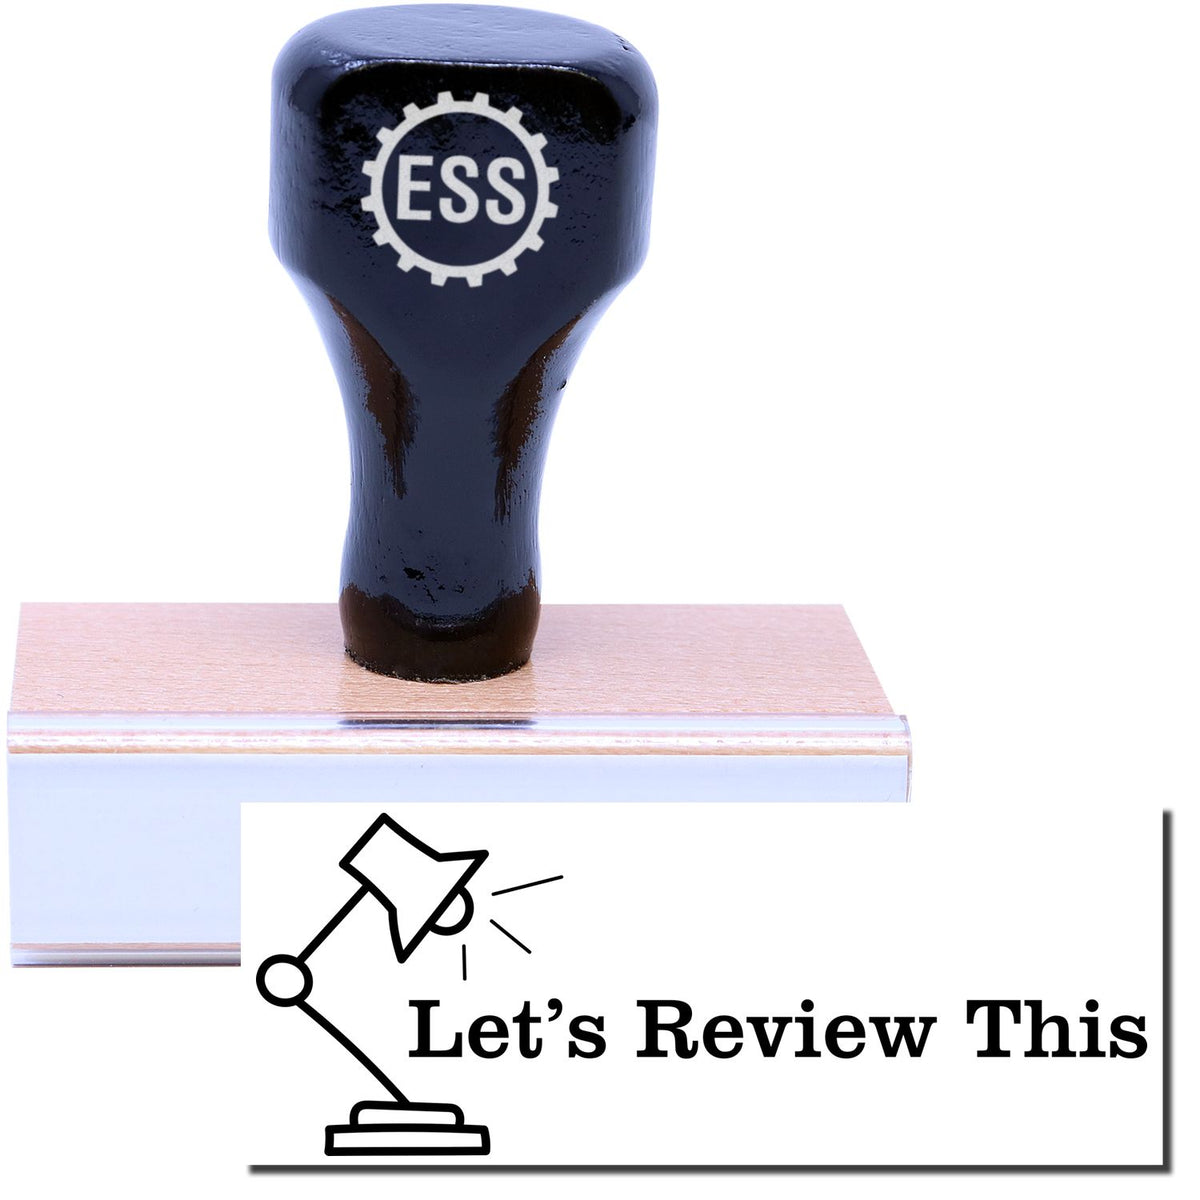 A stock office rubber stamp with a stamped image showing how the text &quot;Let&#39;s Review This&quot; in a large bold font with the image of a lamp is displayed after stamping.